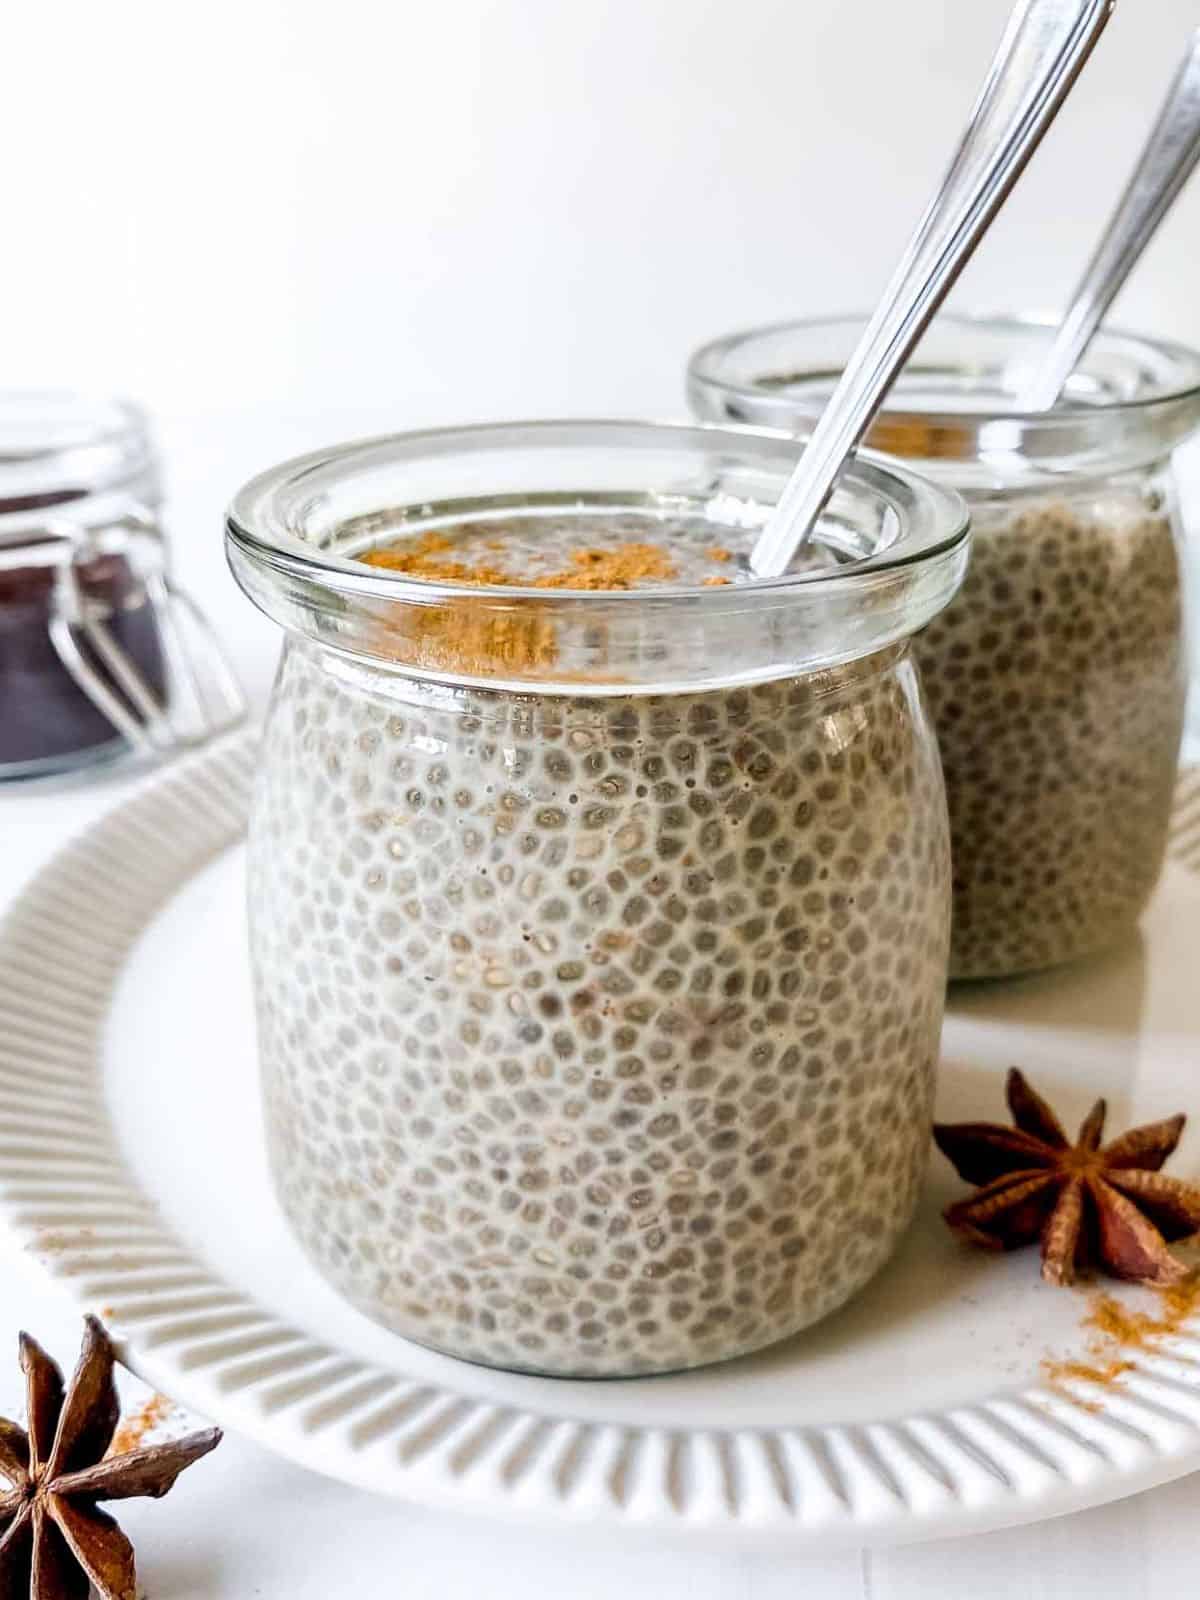 two glasses of coffee chia pudding with spoons in them on a cream plate with a jar of coffee in the background.